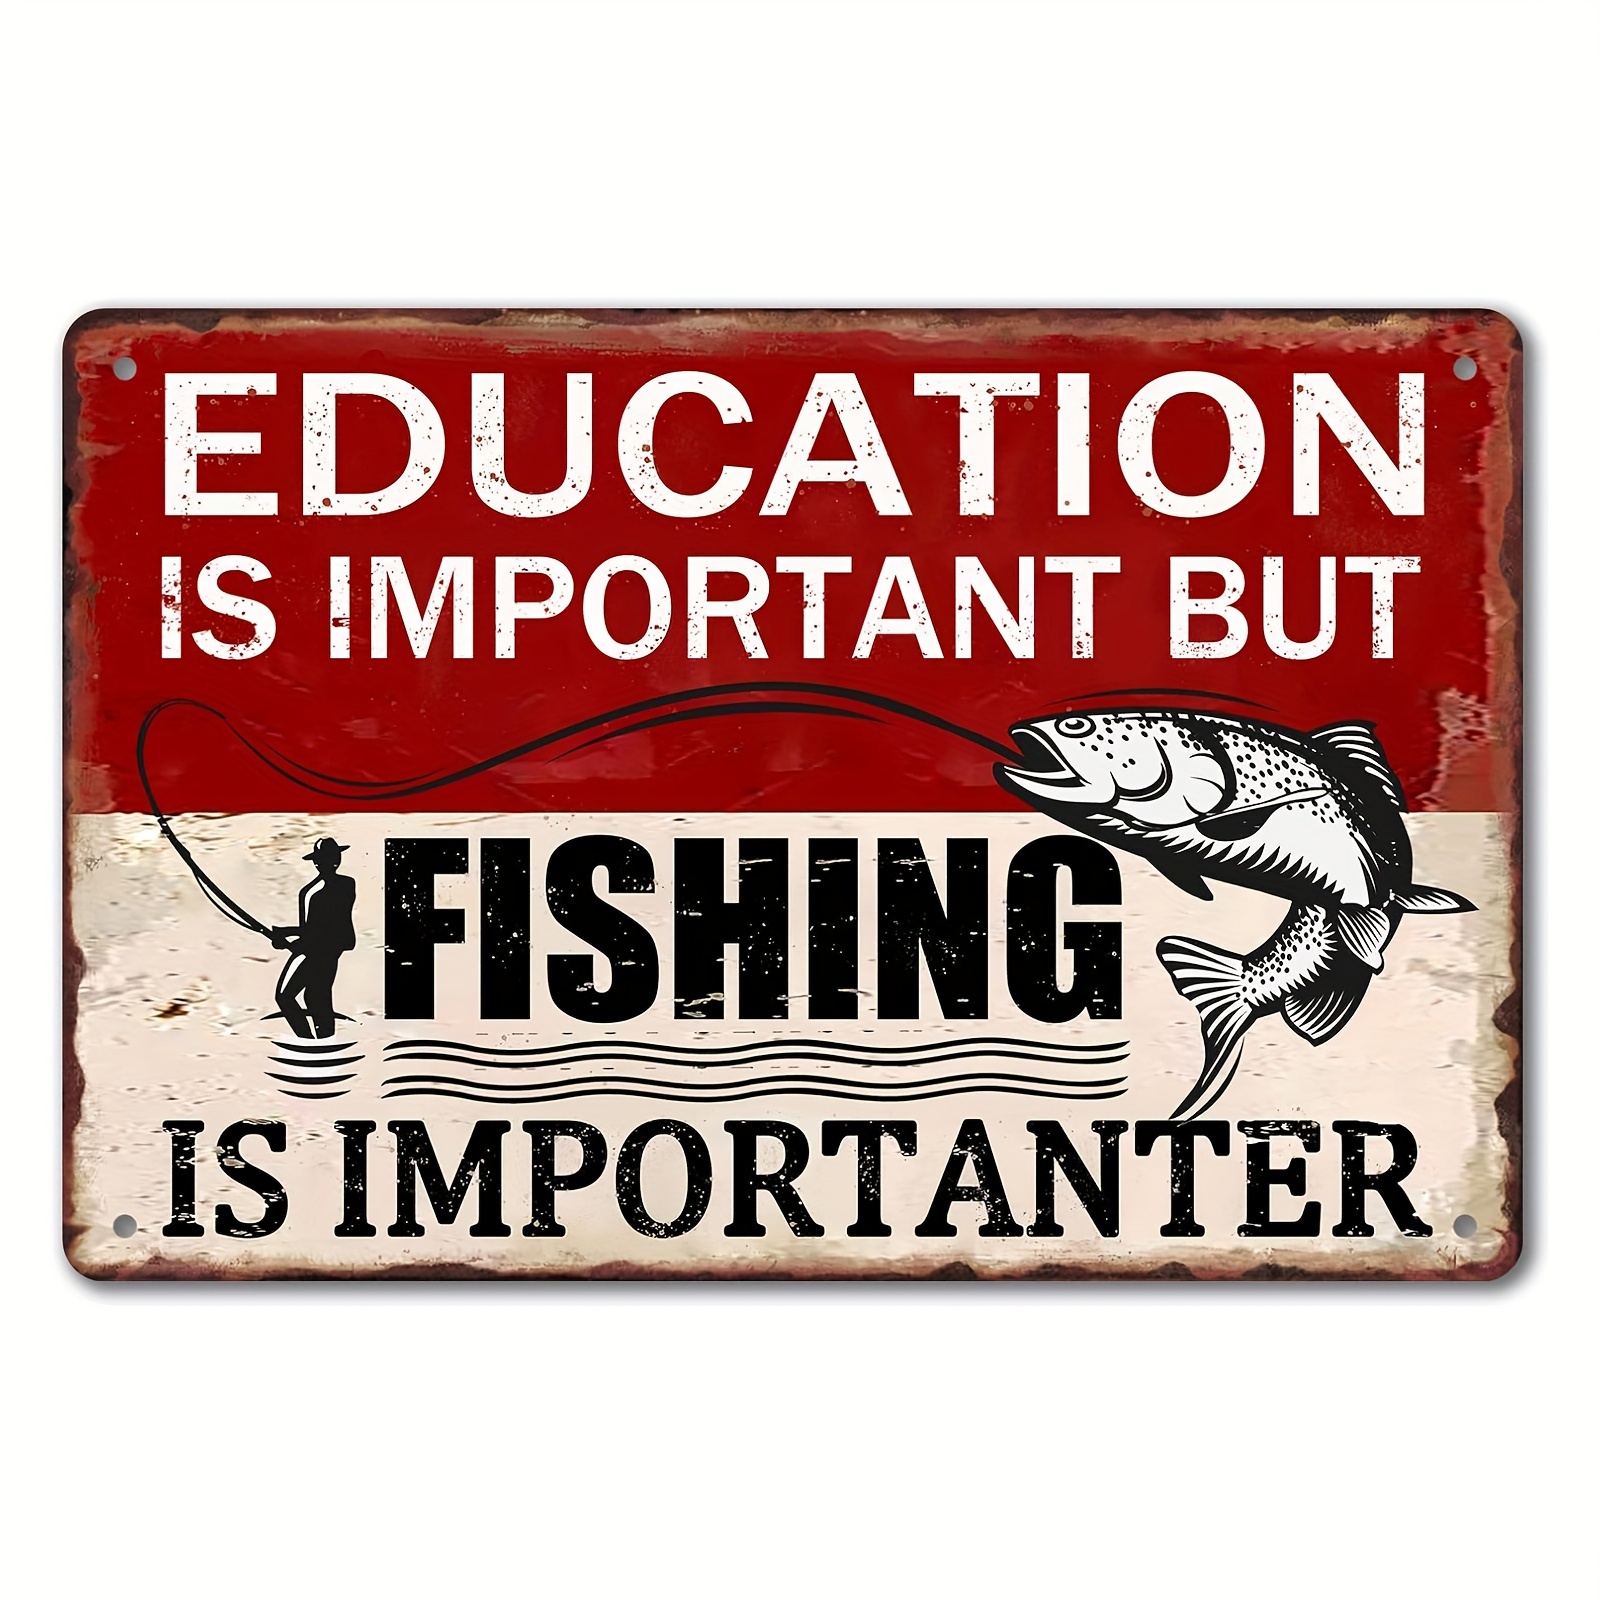 Funny Fishing Metal Tin Signs Vintage Fishing Sign Lake House Decor For  Home Education Is Important But Fishing Is More Important Sign 20.32x30.48  Cm, Shop The Latest Trends